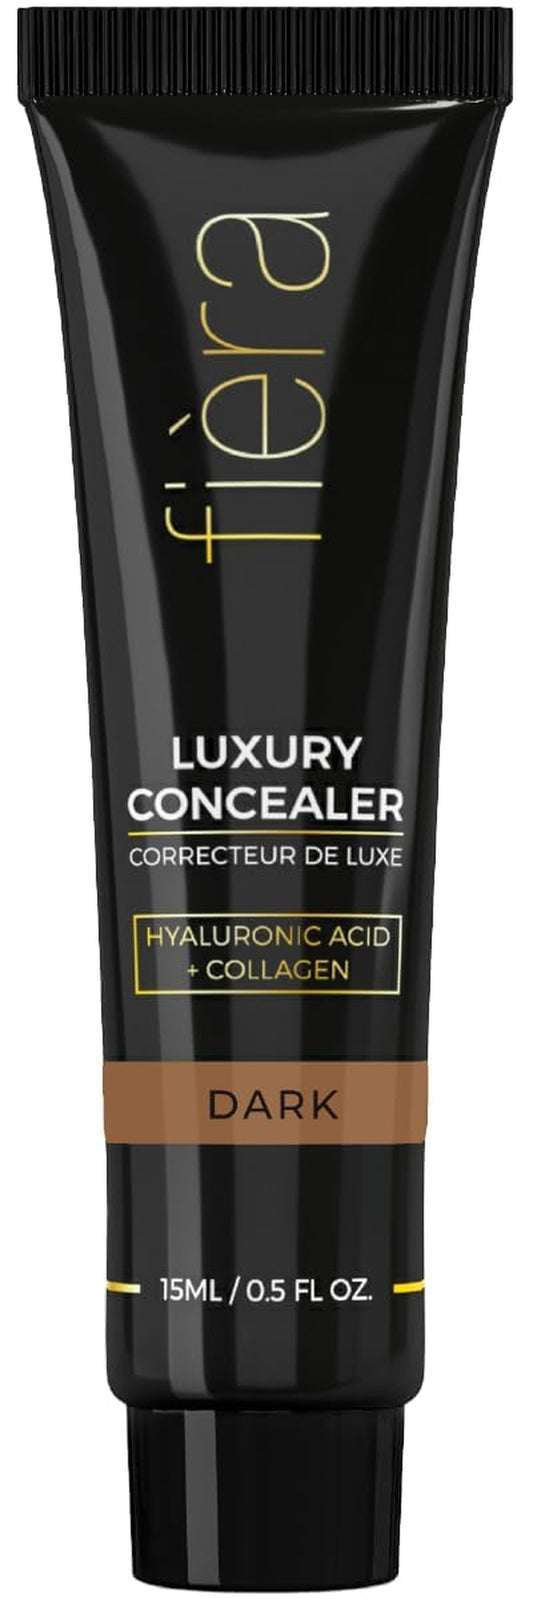 Luxury Concealer with Anti-Aging - All Day Coverage for Dark Circles, Fine Lines, Wrinkles & Spots - Dark, 0.5 Ounce